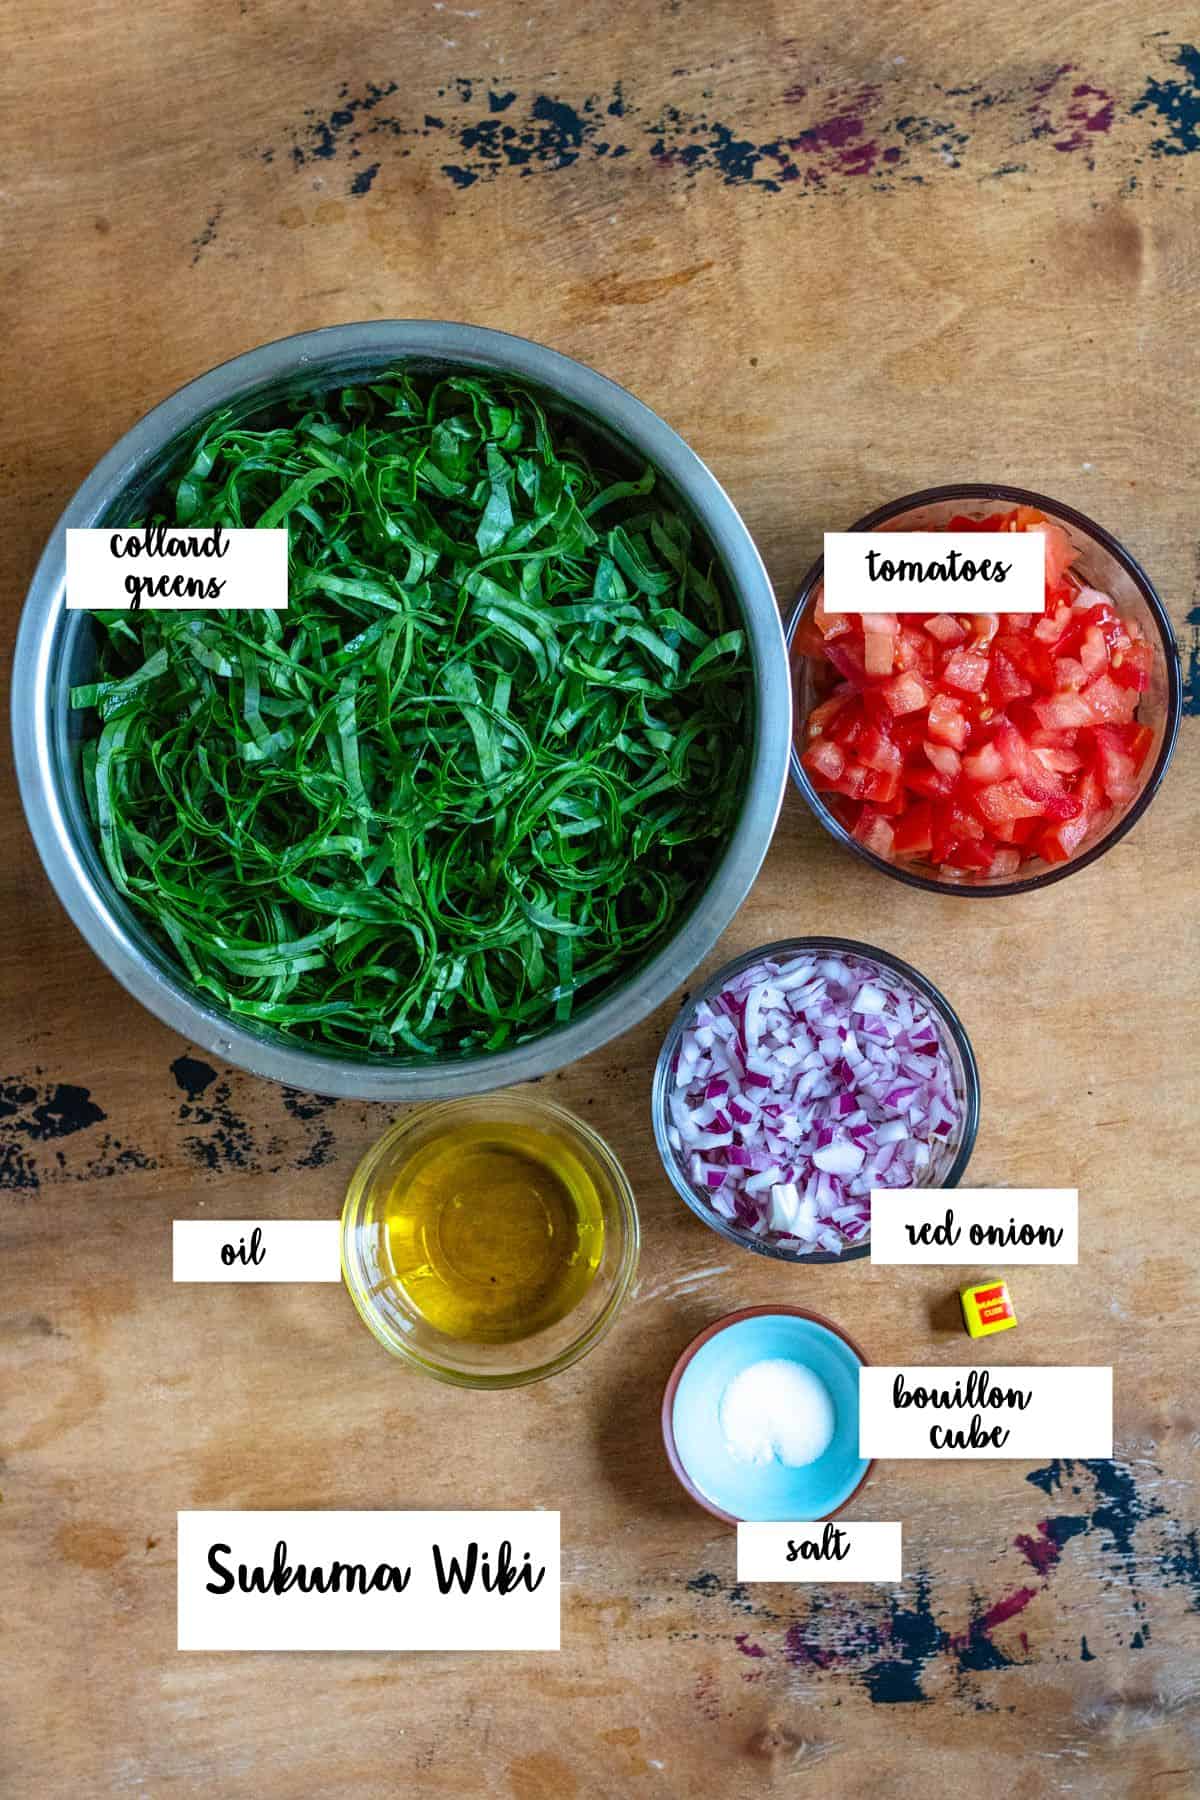 Ingredients shown are used to prepare sukuma wiki. 